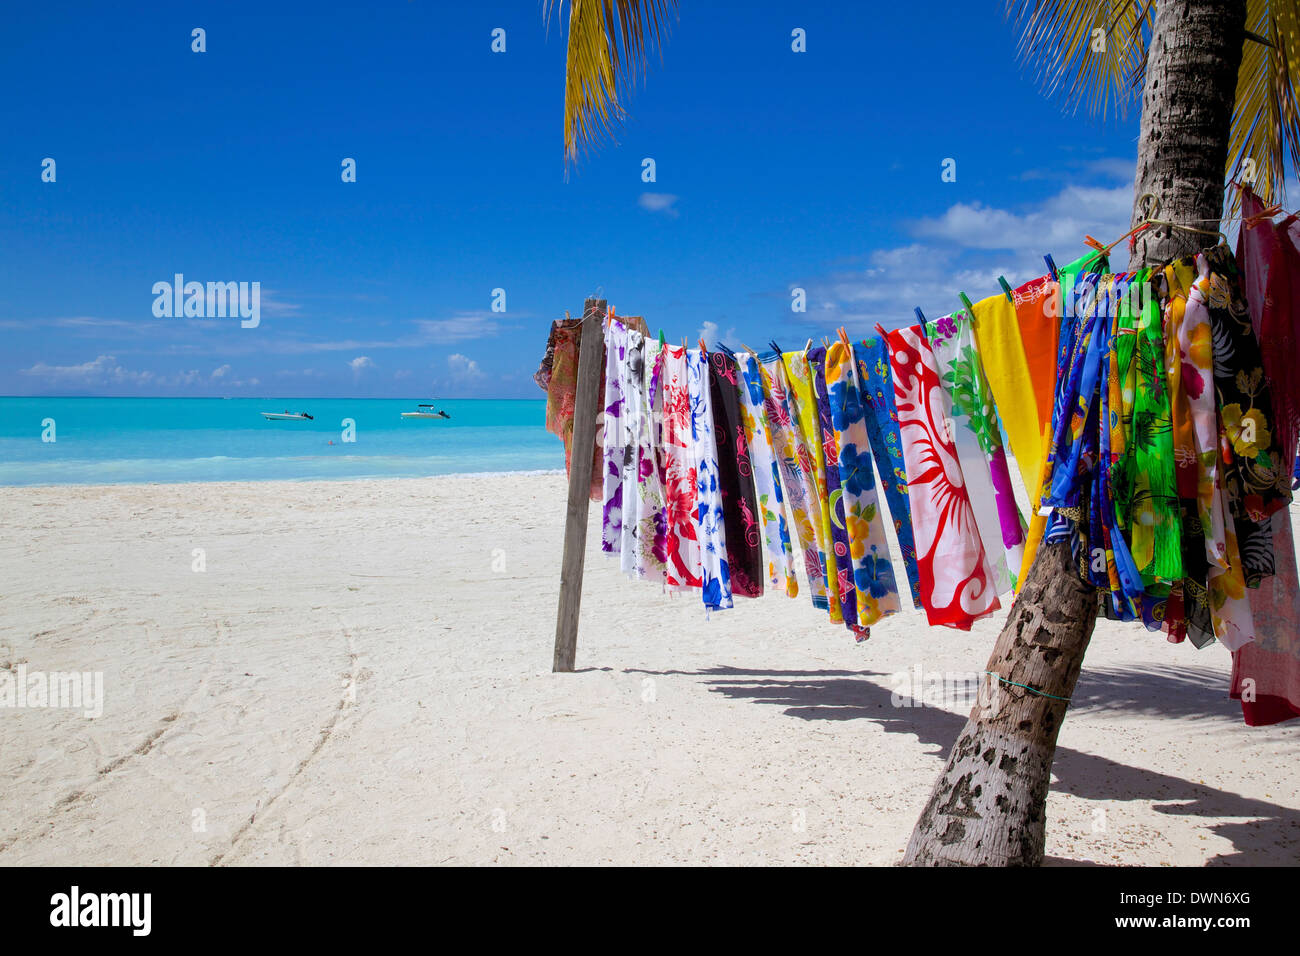 Beach and vendor's stall, Jolly Harbour, St. Mary, Antigua, Leeward Islands, West Indies, Caribbean, Central America Stock Photo